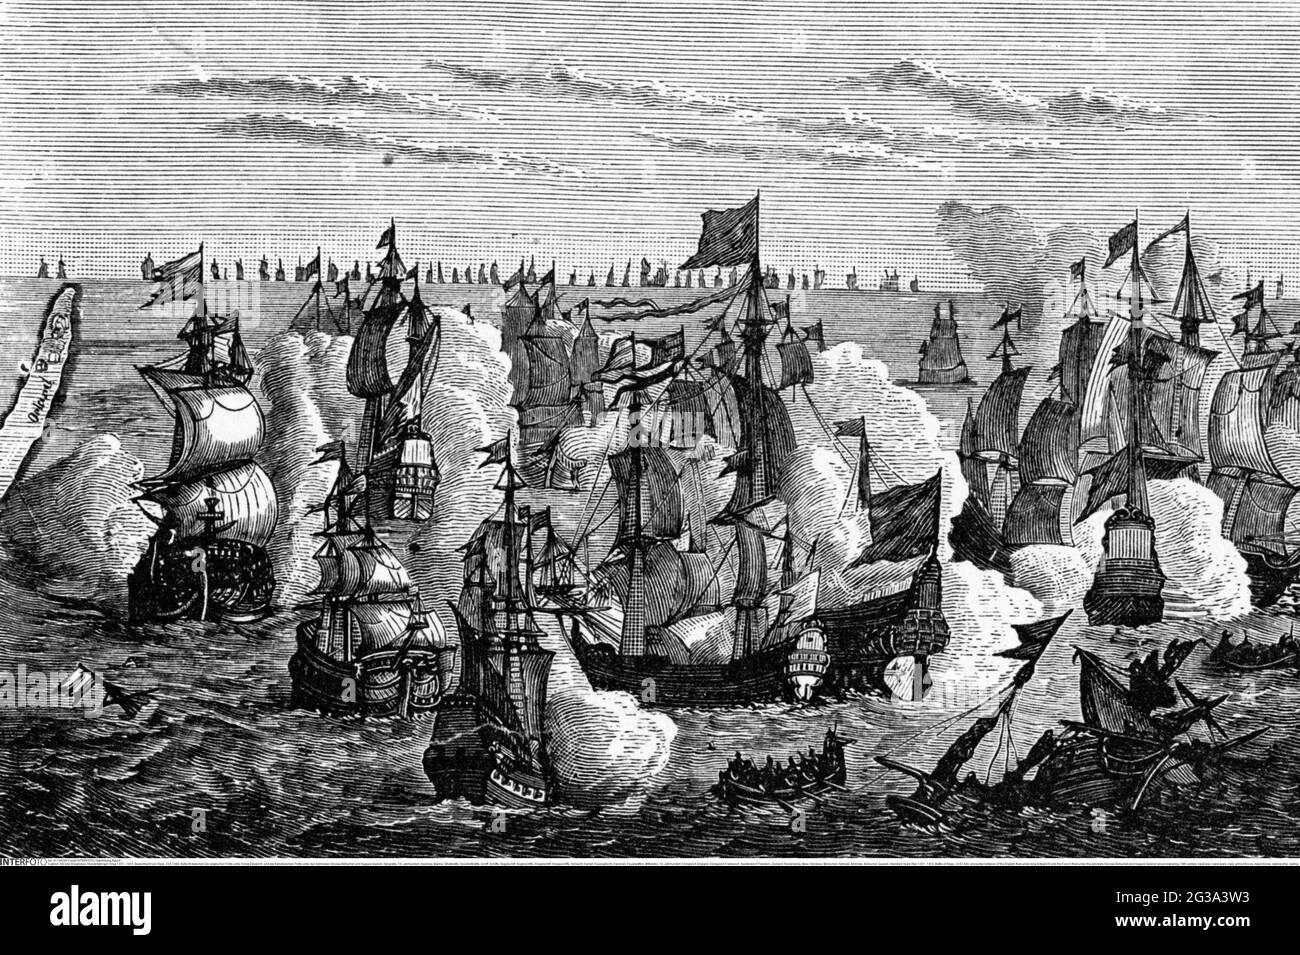 Hundred Years War 1337 - 1453, Battle of Sluys, 24.6.1340, ADDITIONAL-RIGHTS-CLEARANCE-INFO-NOT-AVAILABLE Stock Photo